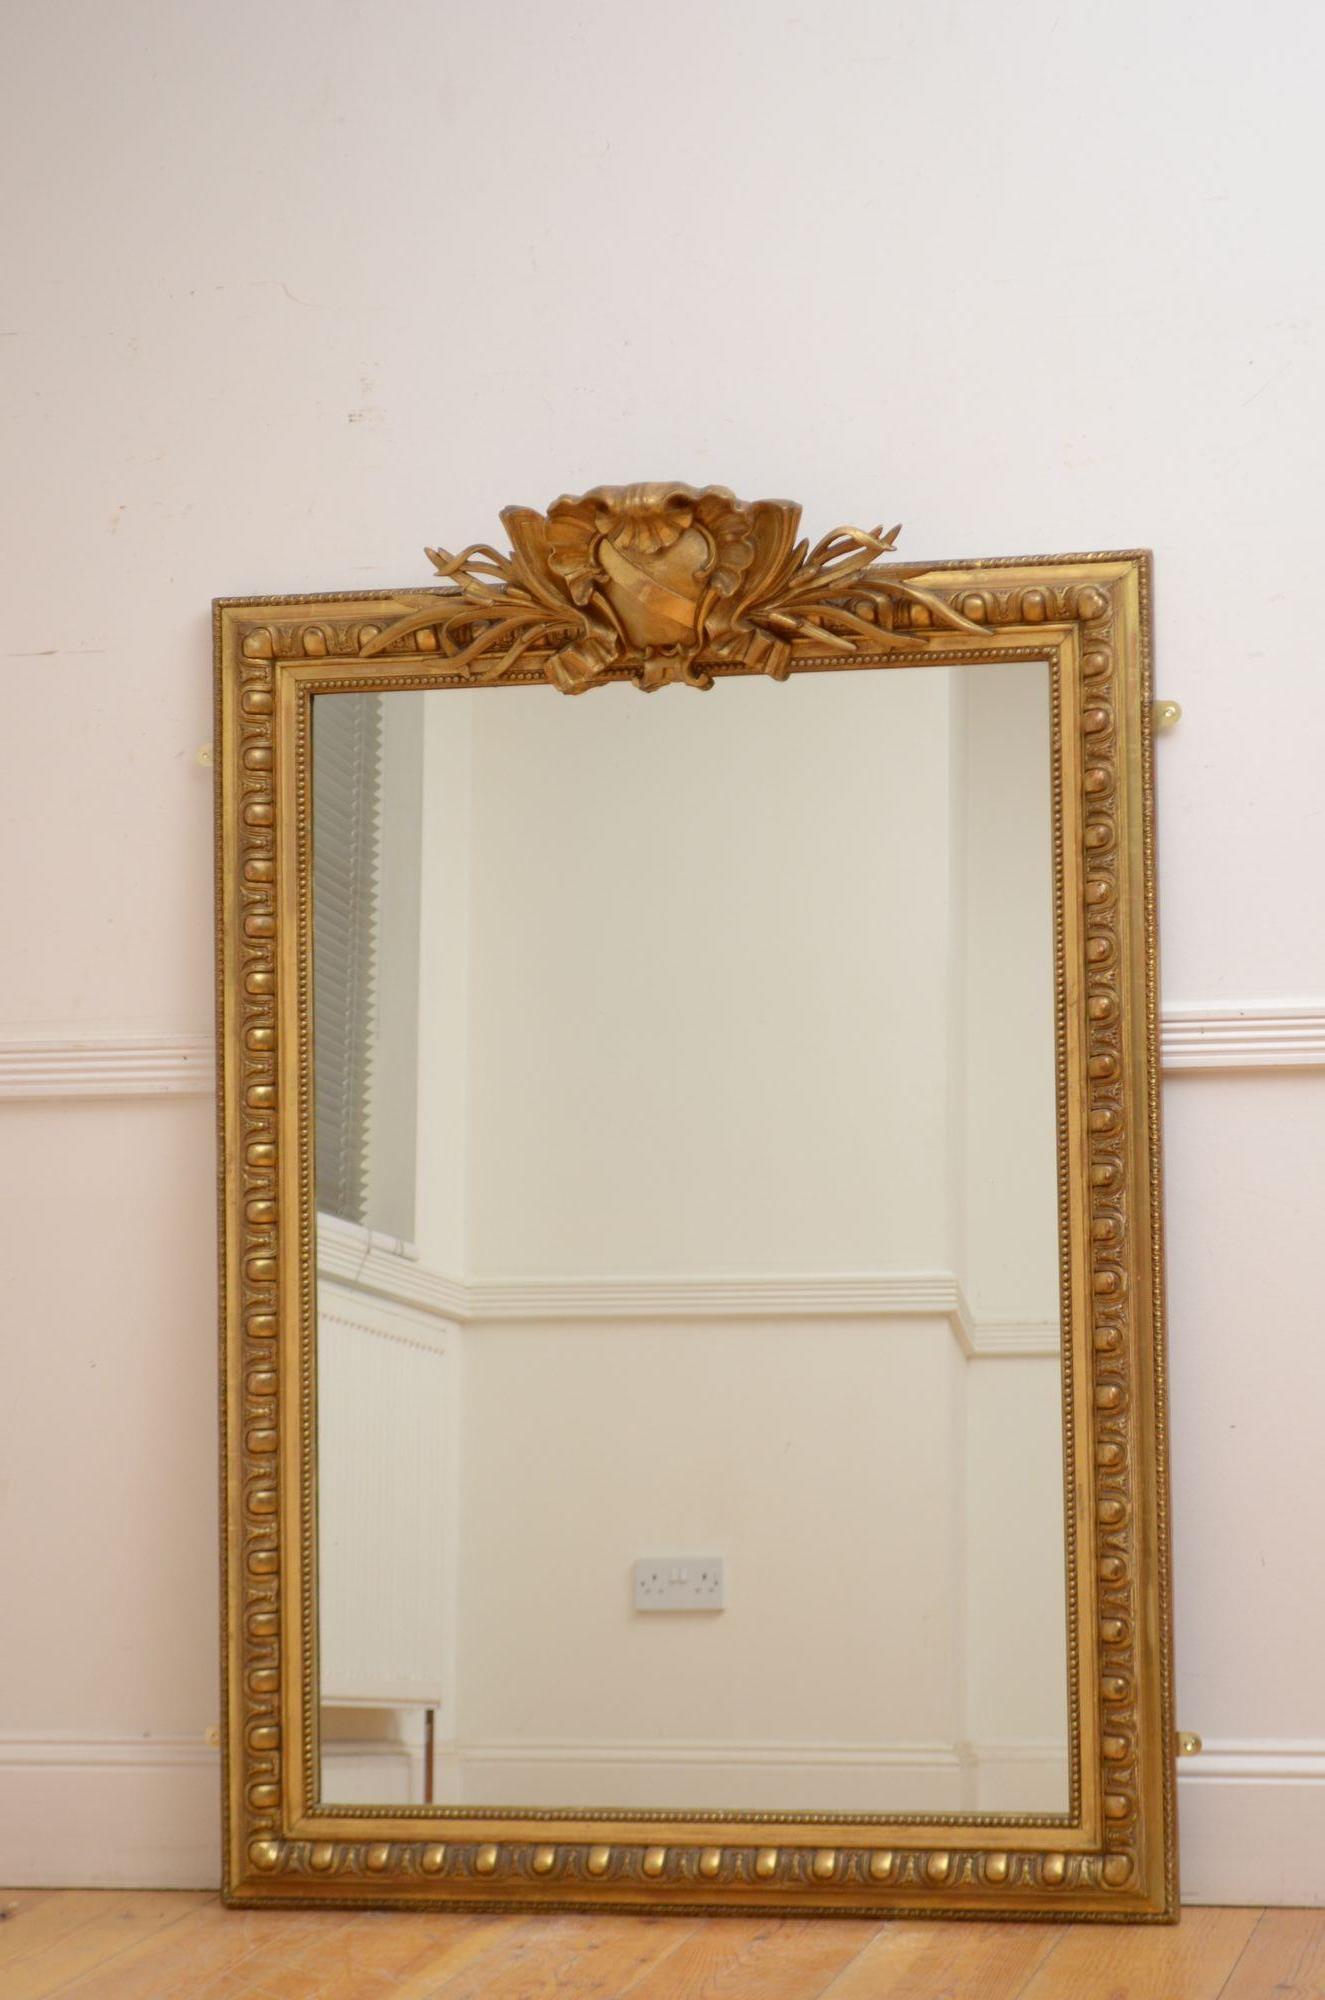 Sn5519 Attractive 19th century giltwood wall mirror, having a replacement glass in beaded and gilded frame with egg and dart decoration and substantial centre crest with shell and foliage scrolls. This antique mirror is in home ready condition.